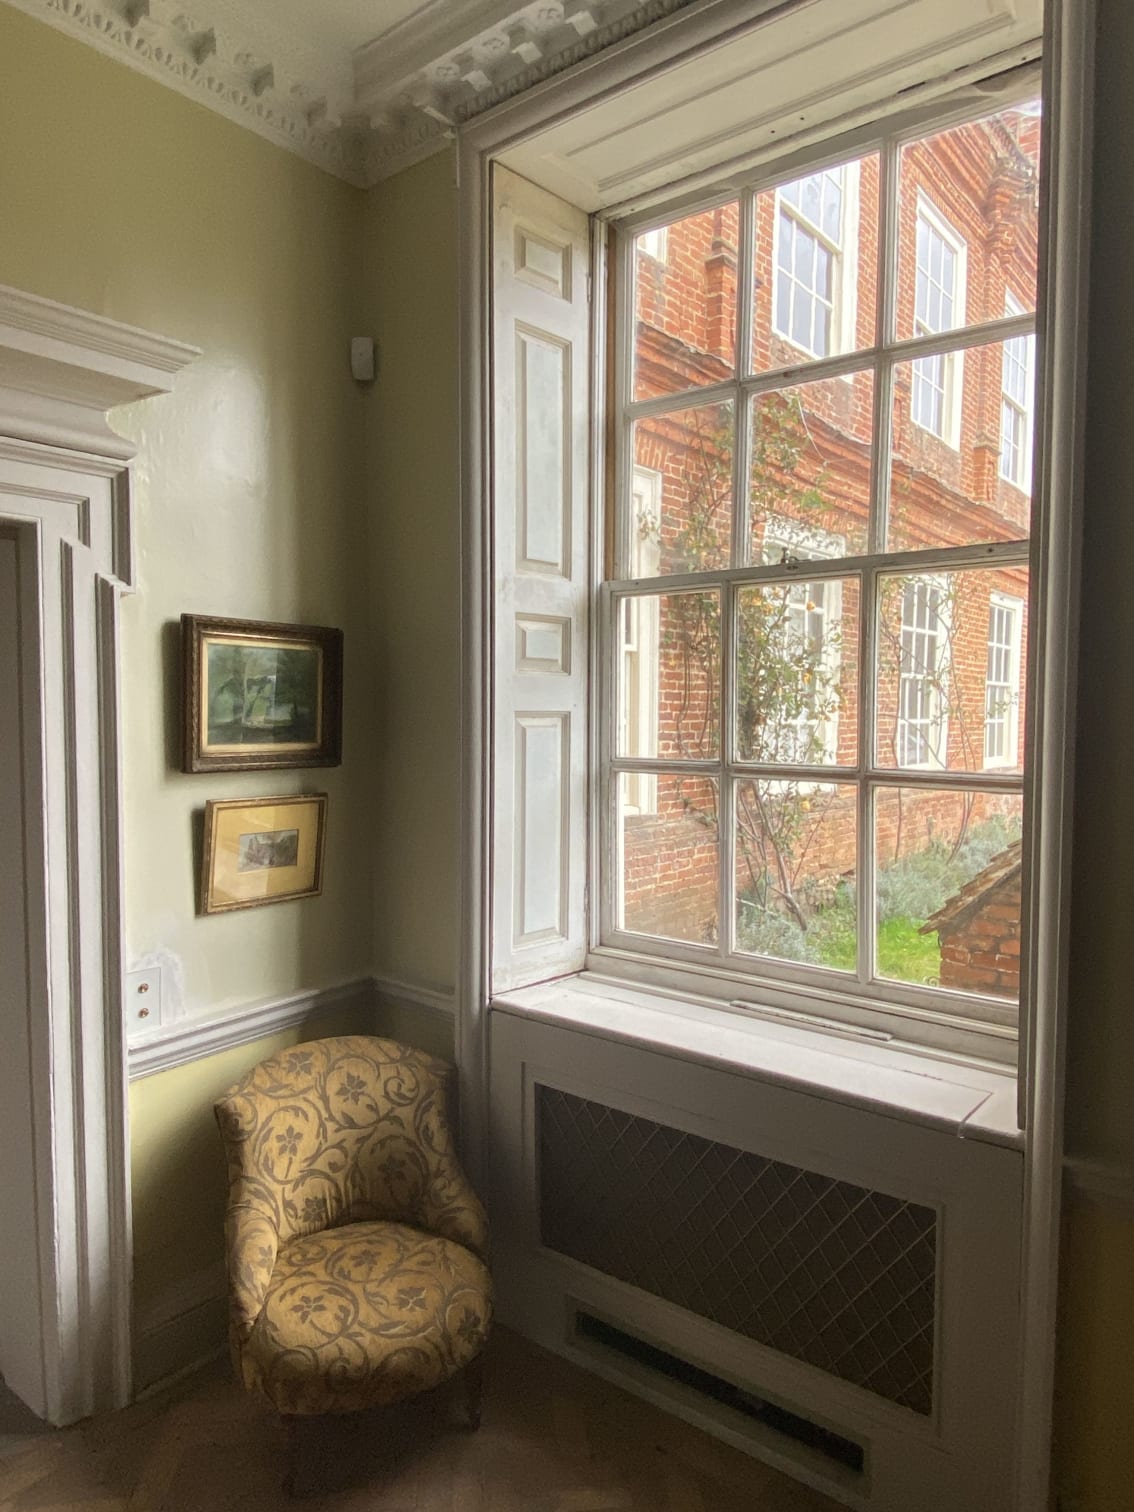 A sash window and small armchair in the Morning Room